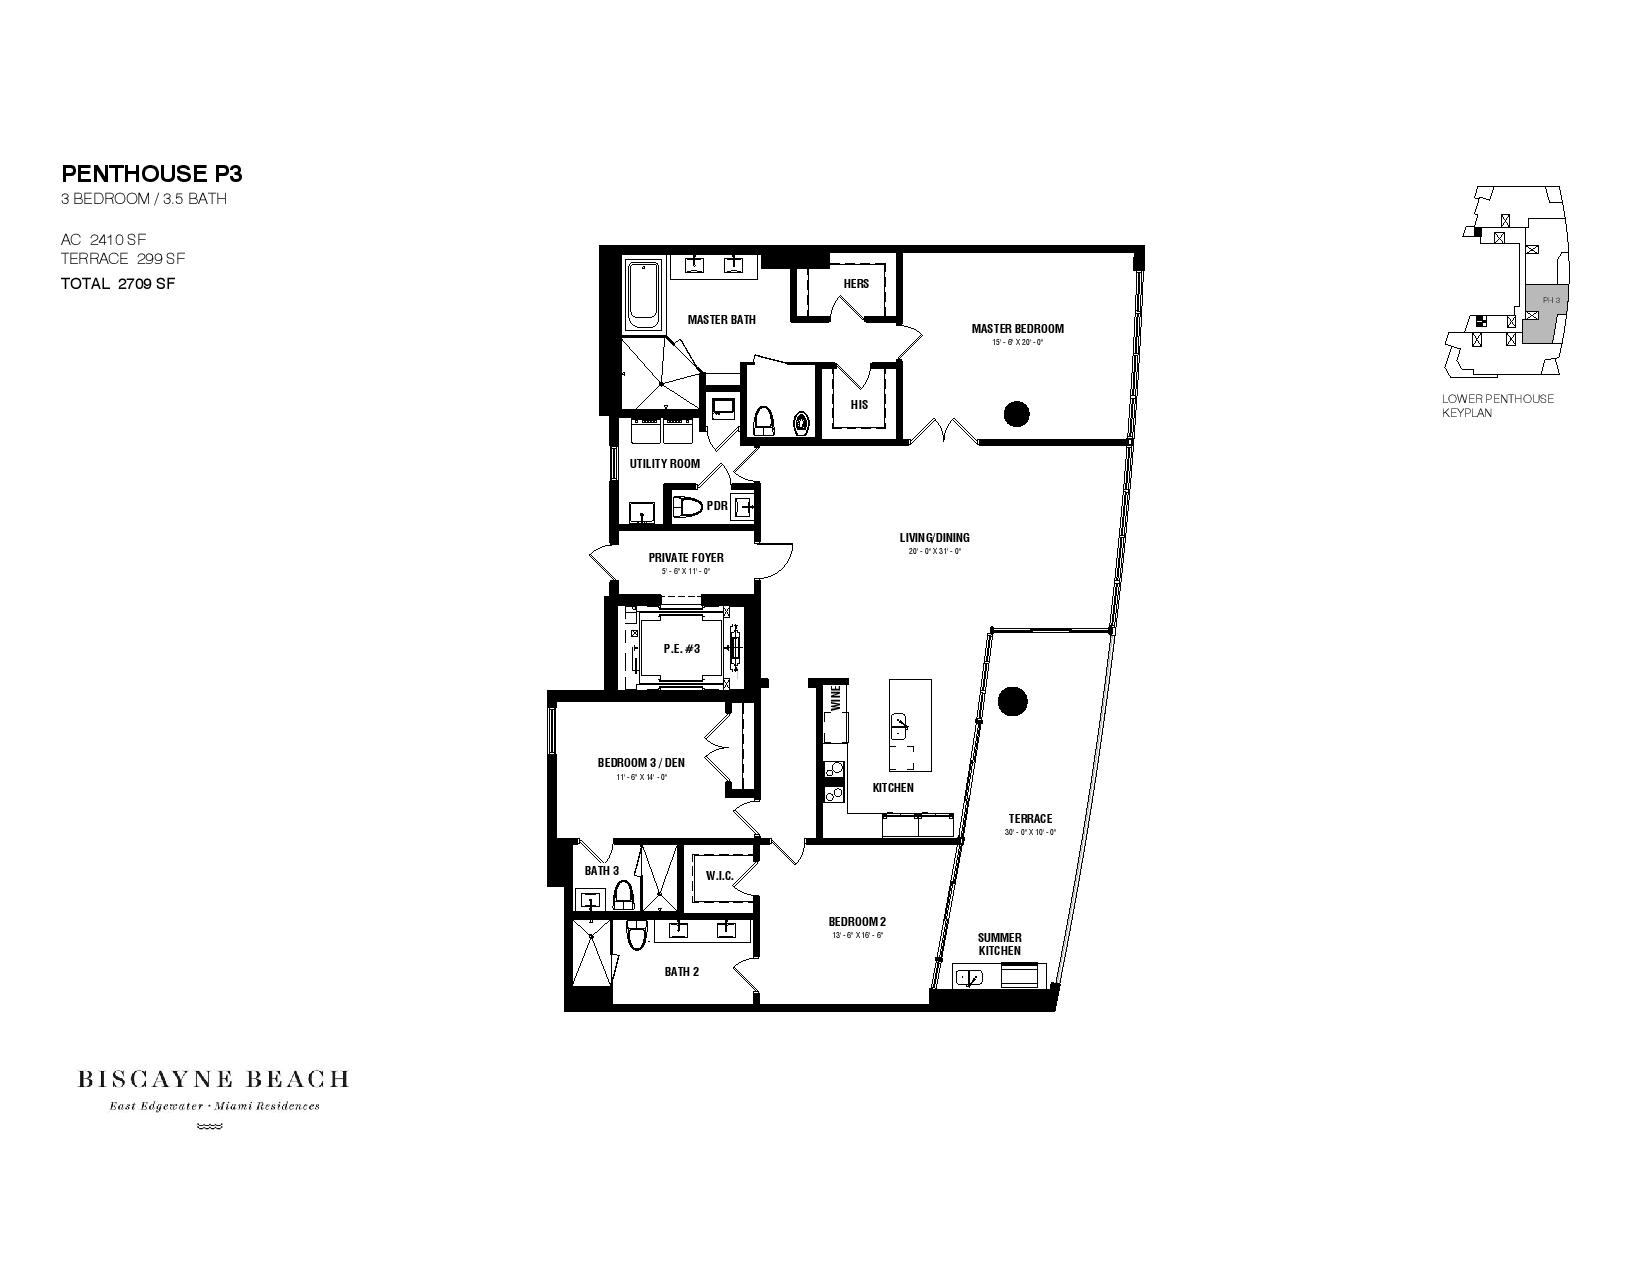 Biscayne Beach Penthouse Residence P3